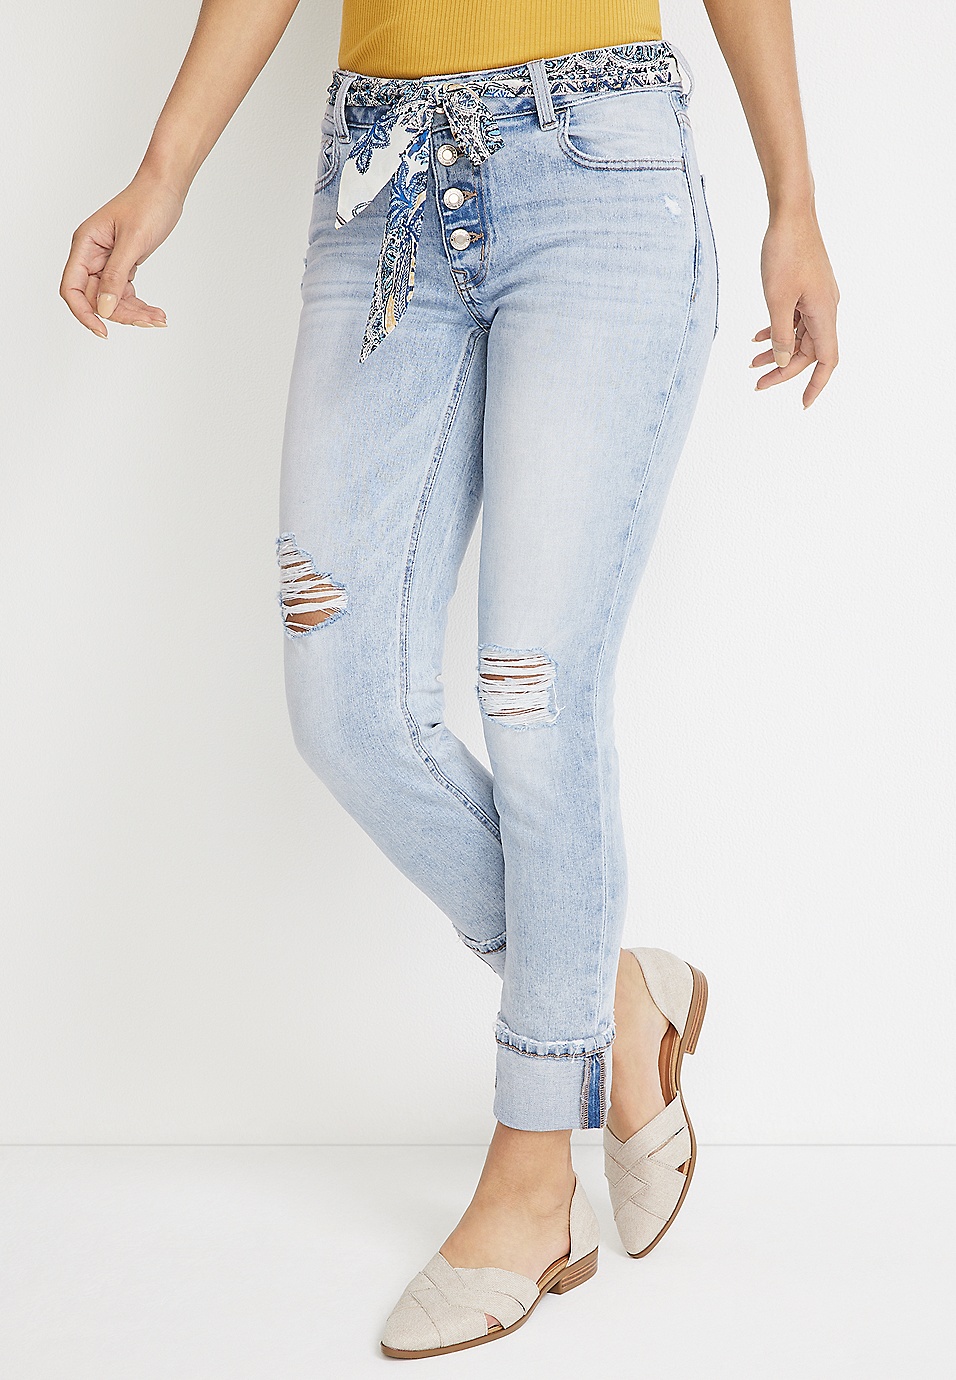 I'm loving these stretchy, slimming and stylish jeans — how to get 30% off